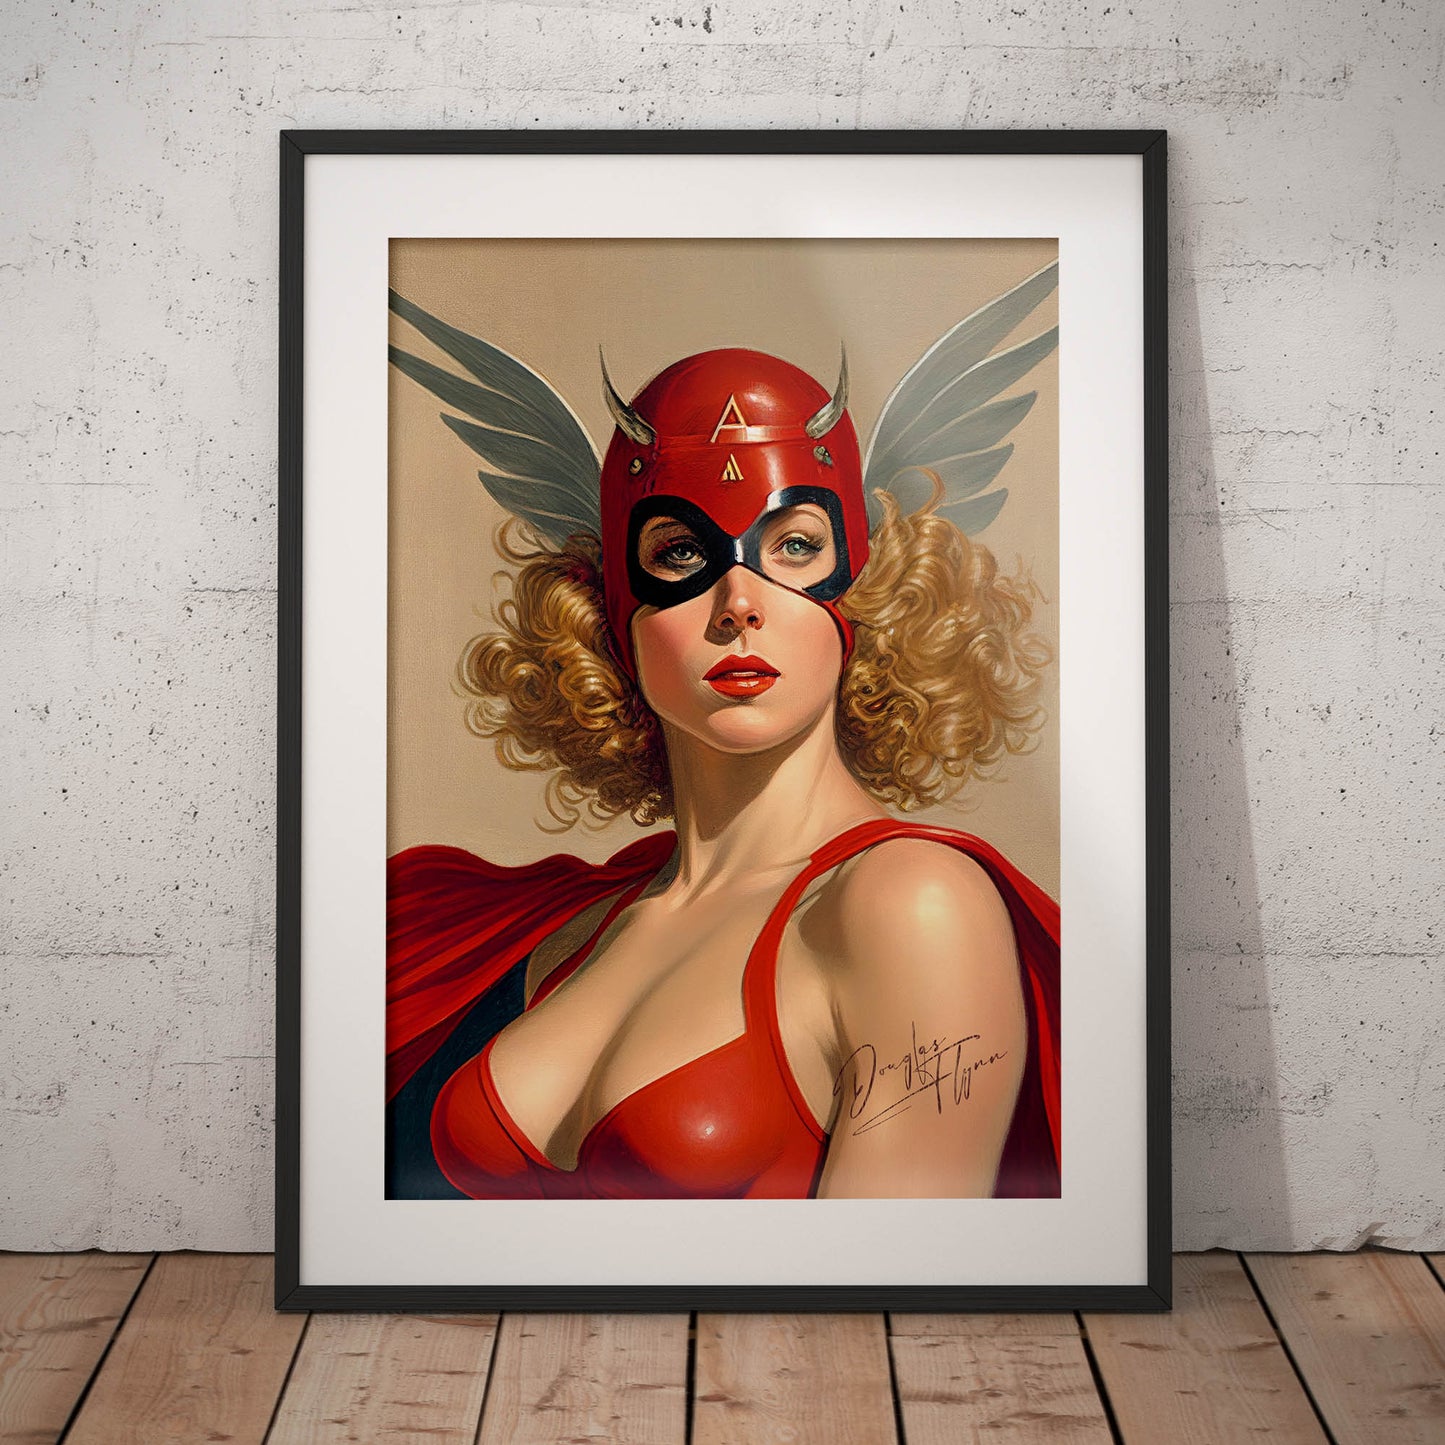 »The Scarlet Skyfighter« retro poster